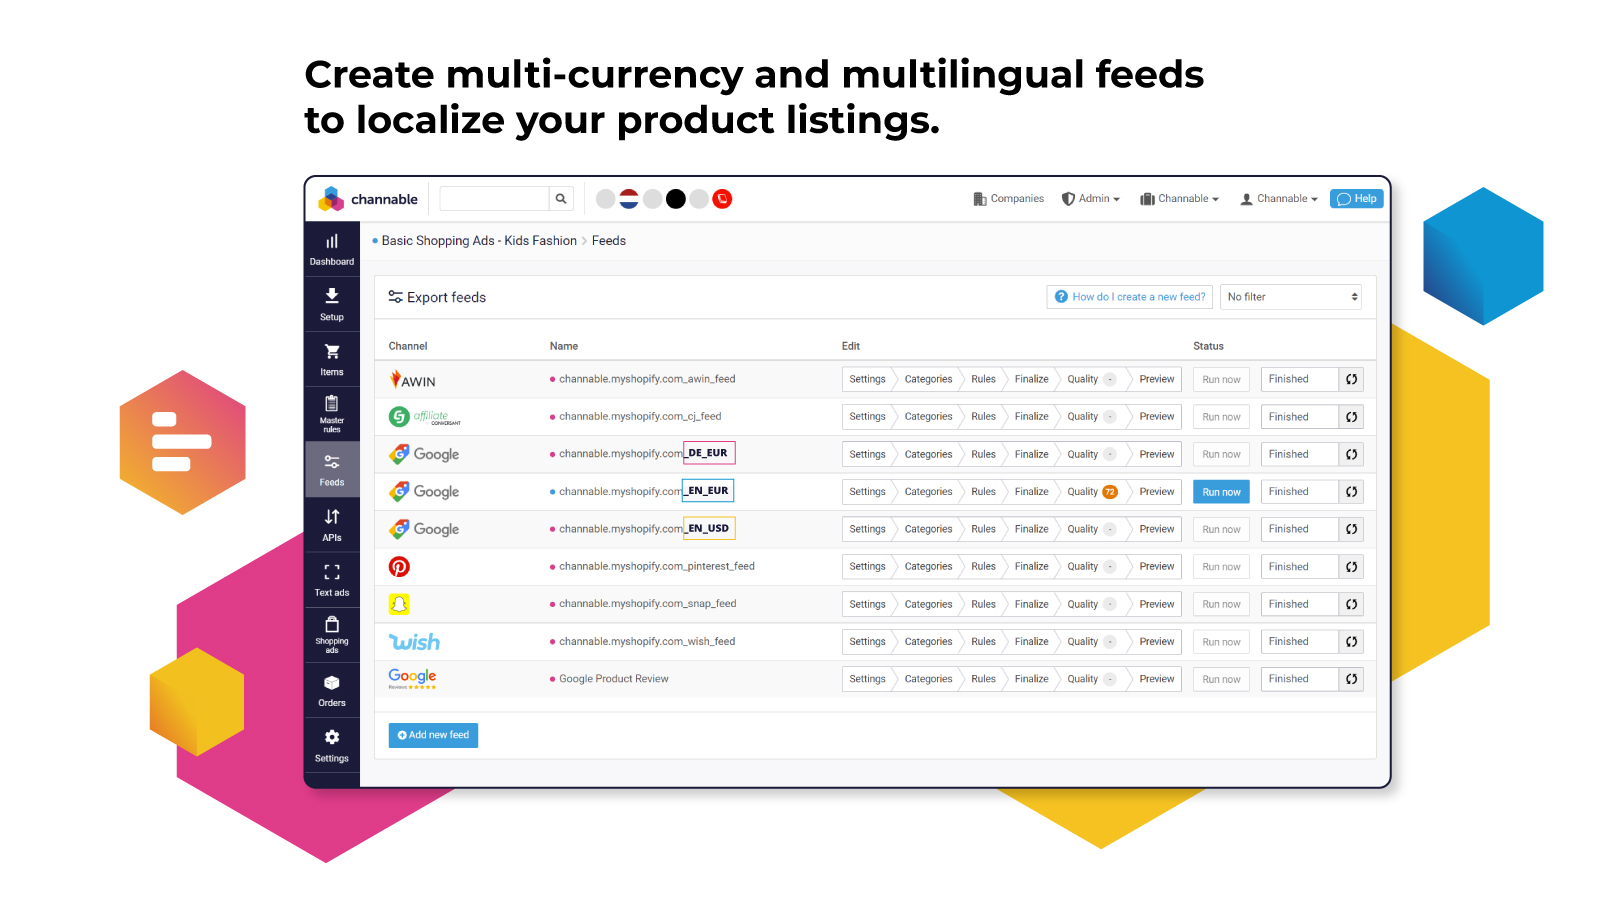 Create multi-currency and multilingual feeds to localize your product listings